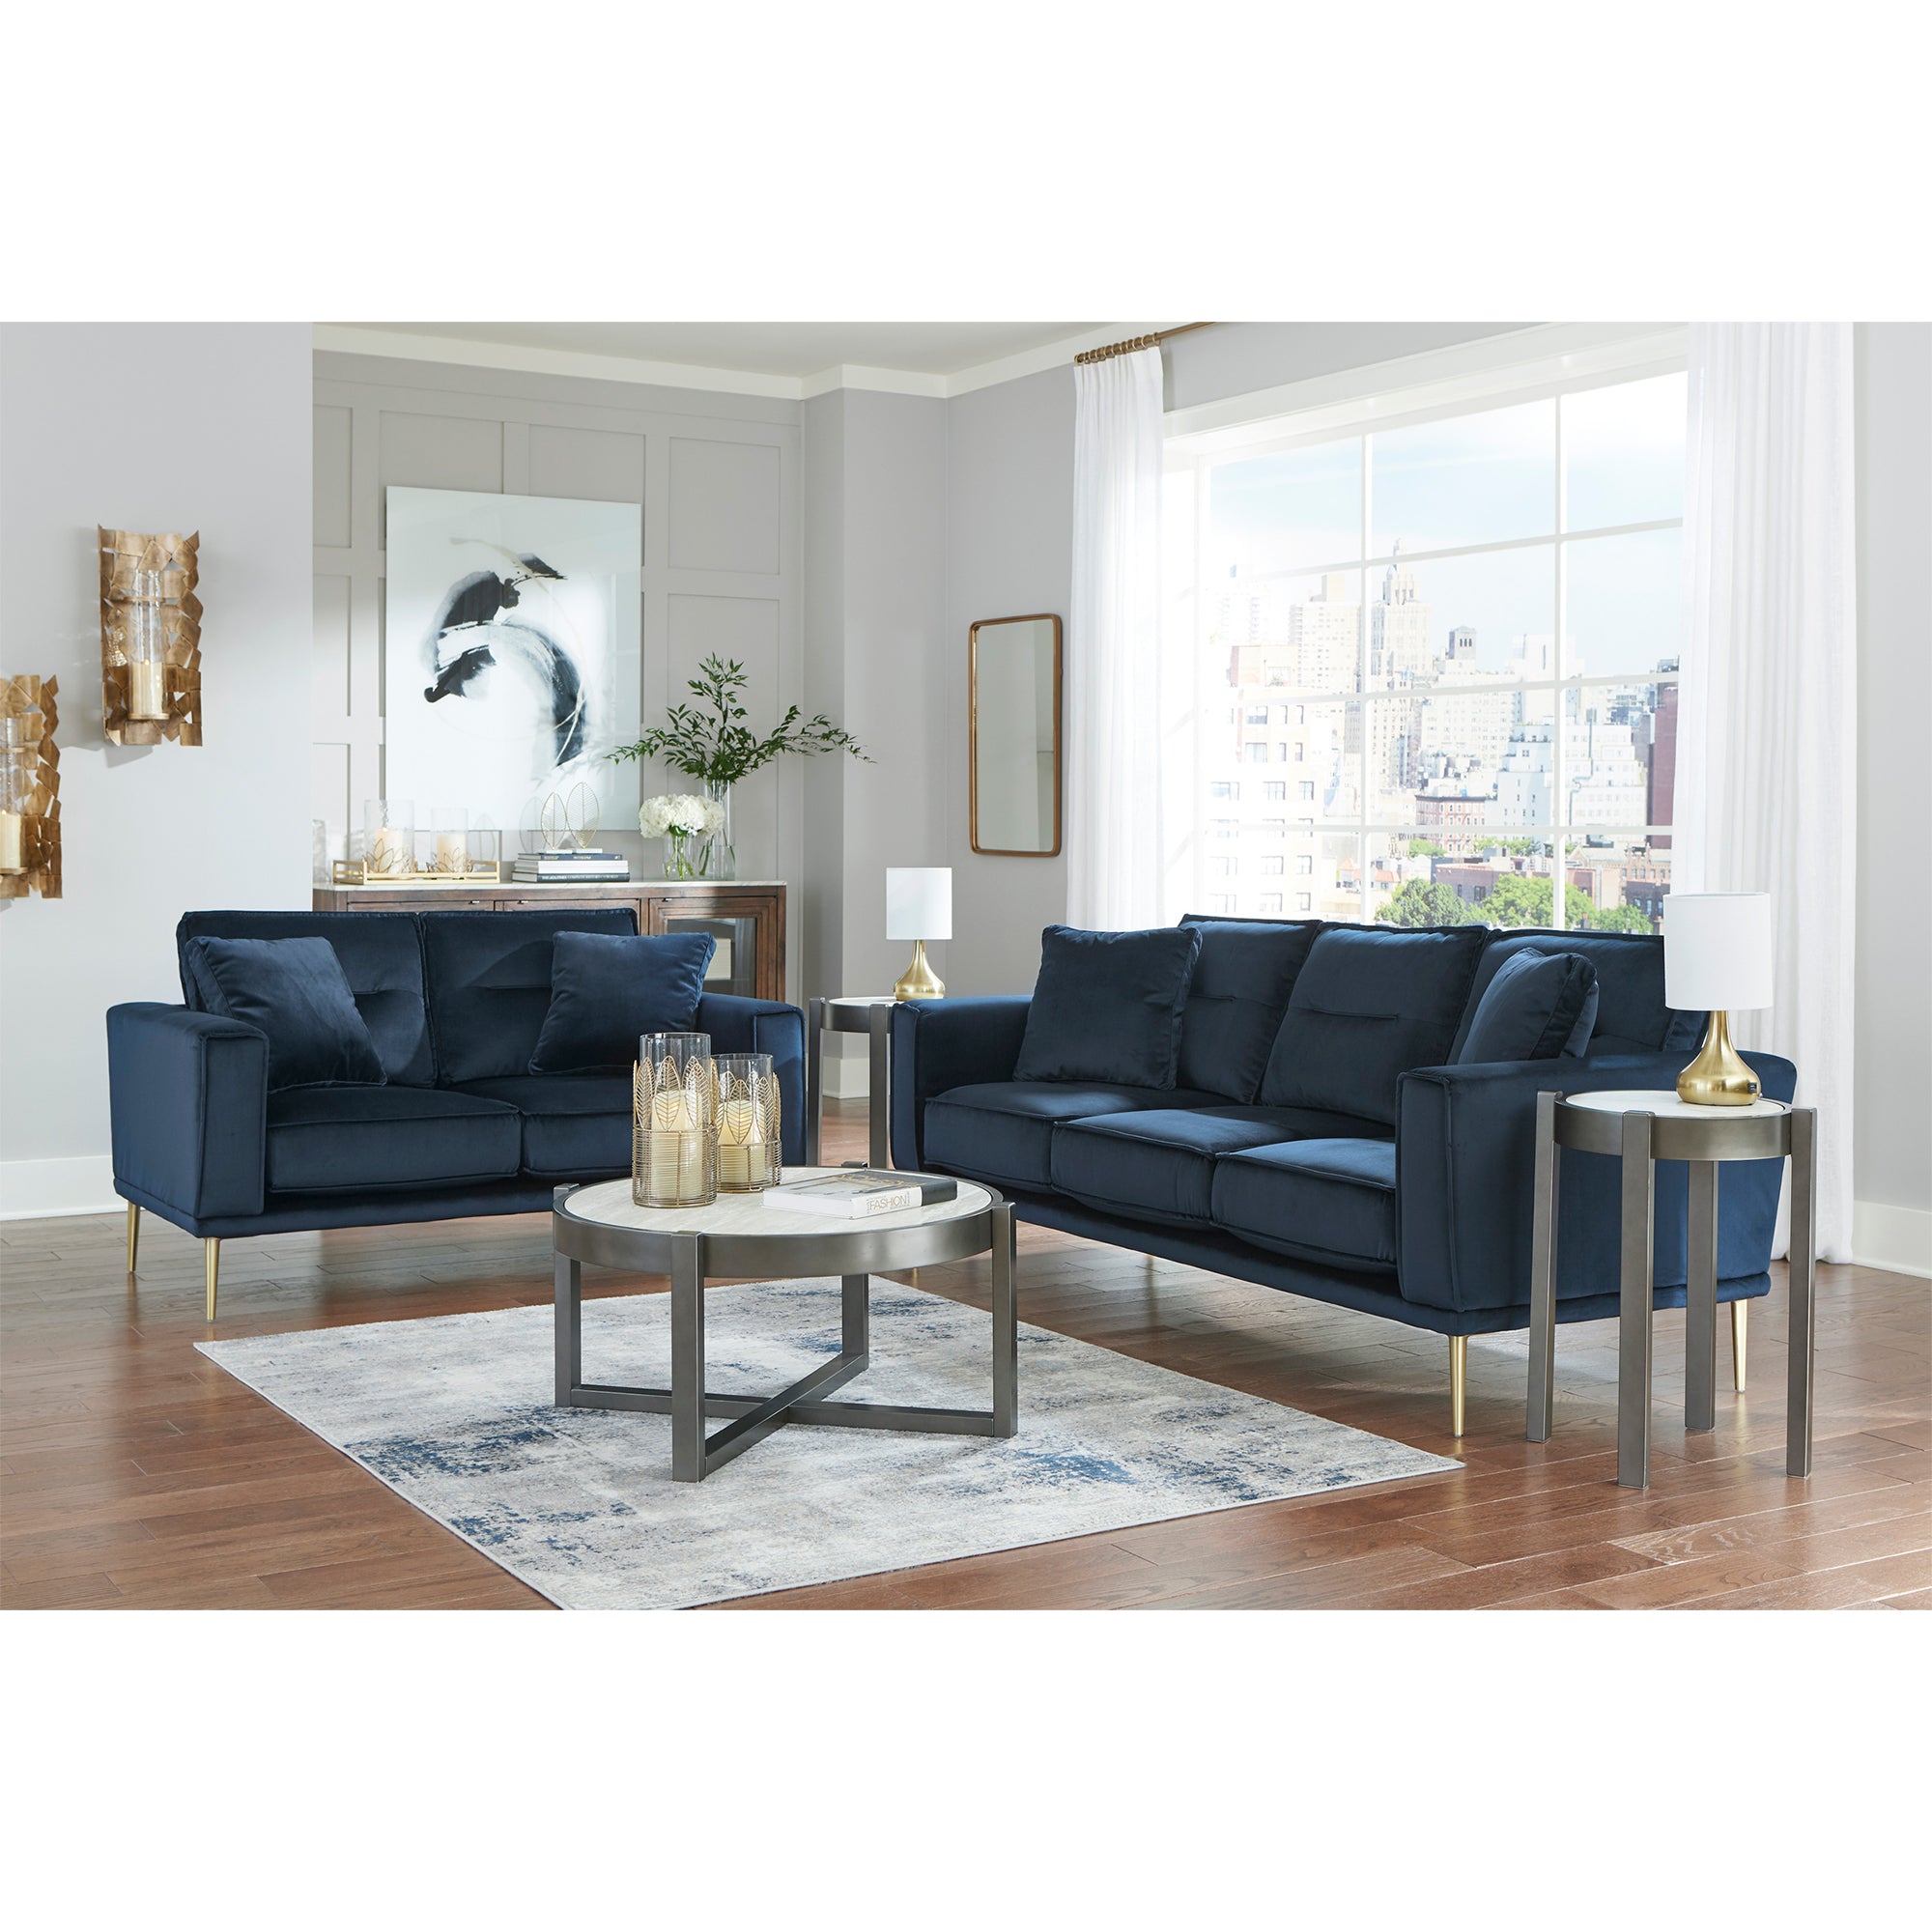 Macleary Sofa and Loveseat in Navy Color